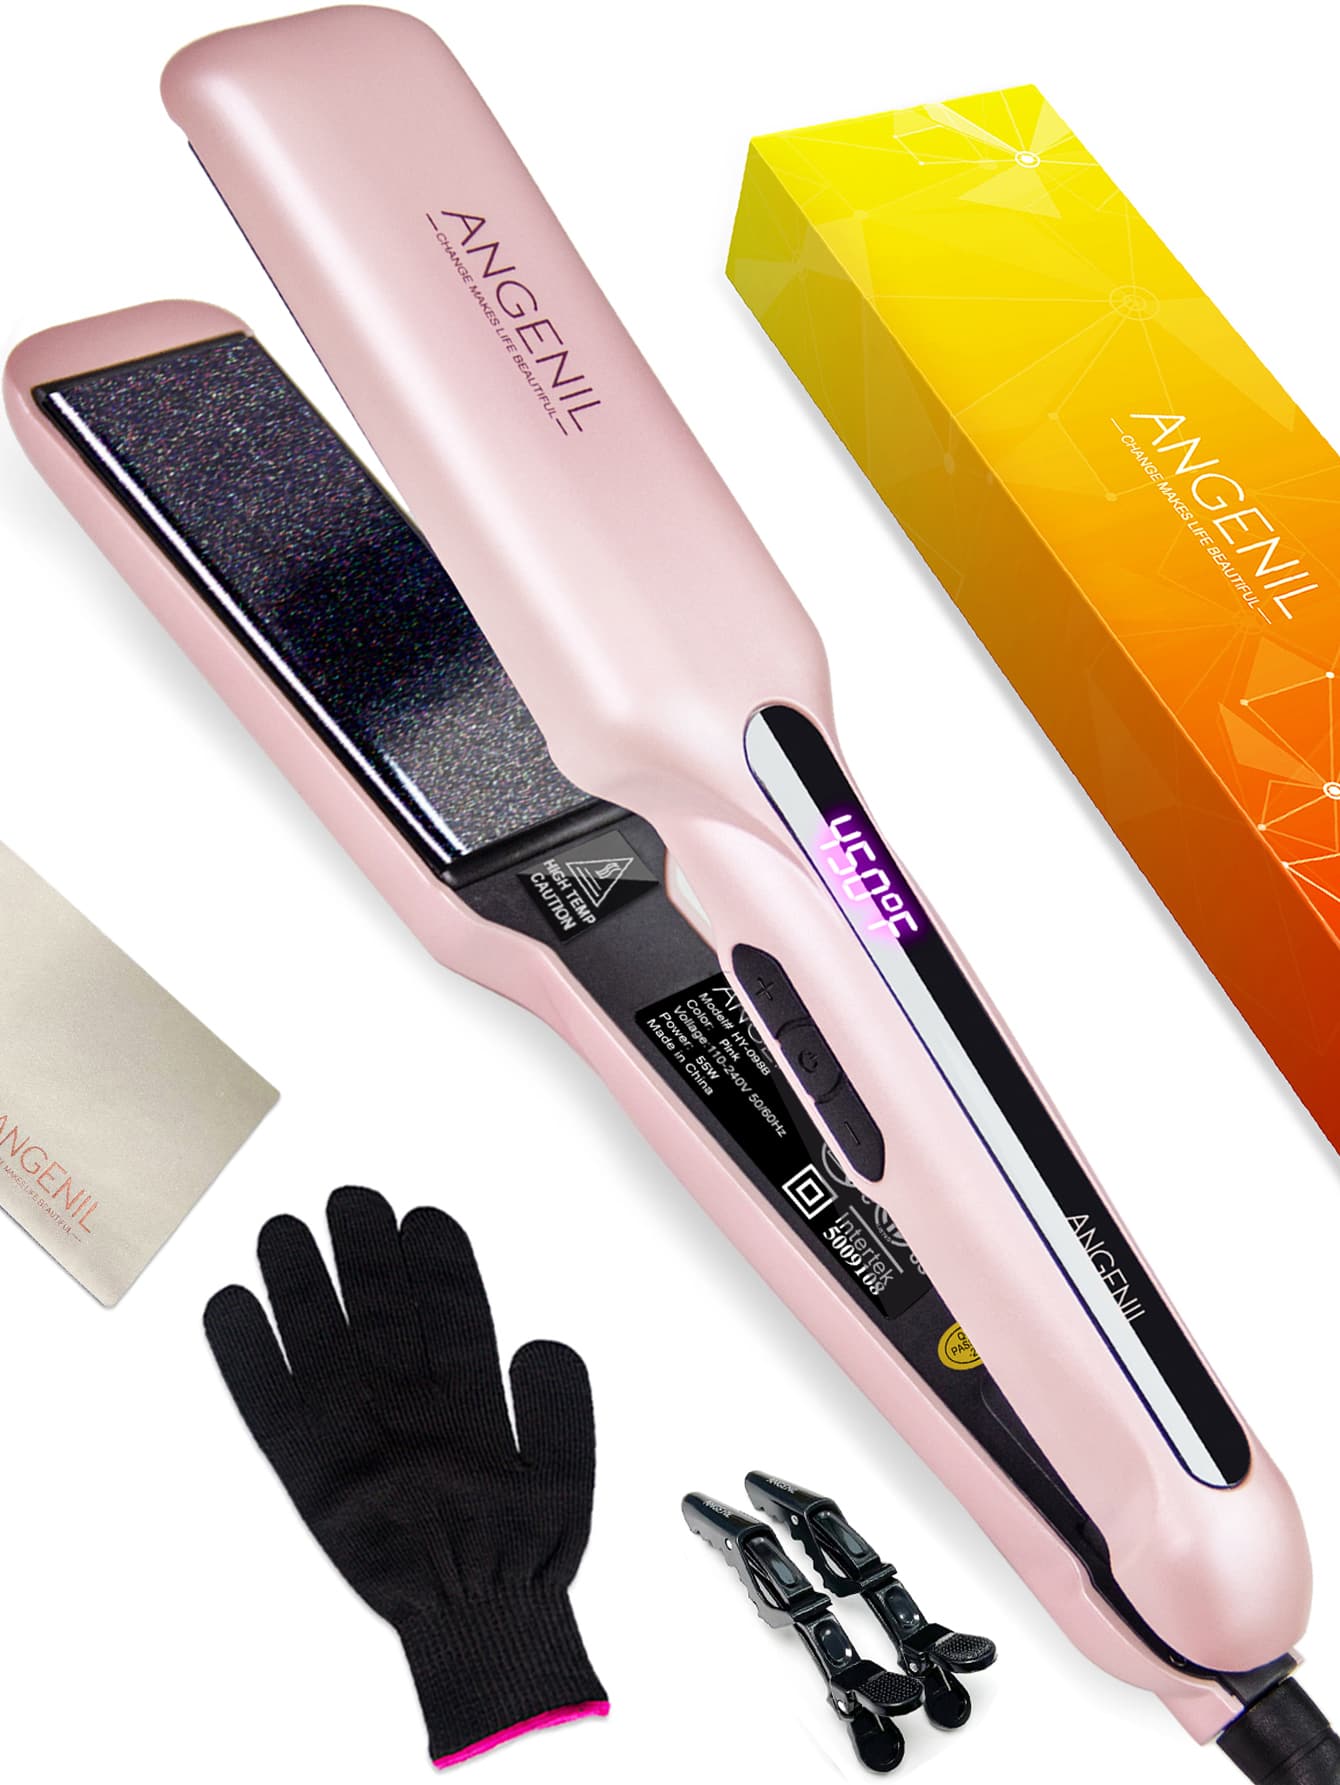 (AU)ANGENIL Argan Oil Flat Iron Curling Iron in One, Professional Portable Dual Voltage Ceramic Hair Straightener, 1.6 Inch Wide Flat Iron for Thick Hair, Fast Straightening Styling, LCD Display-Pink-1